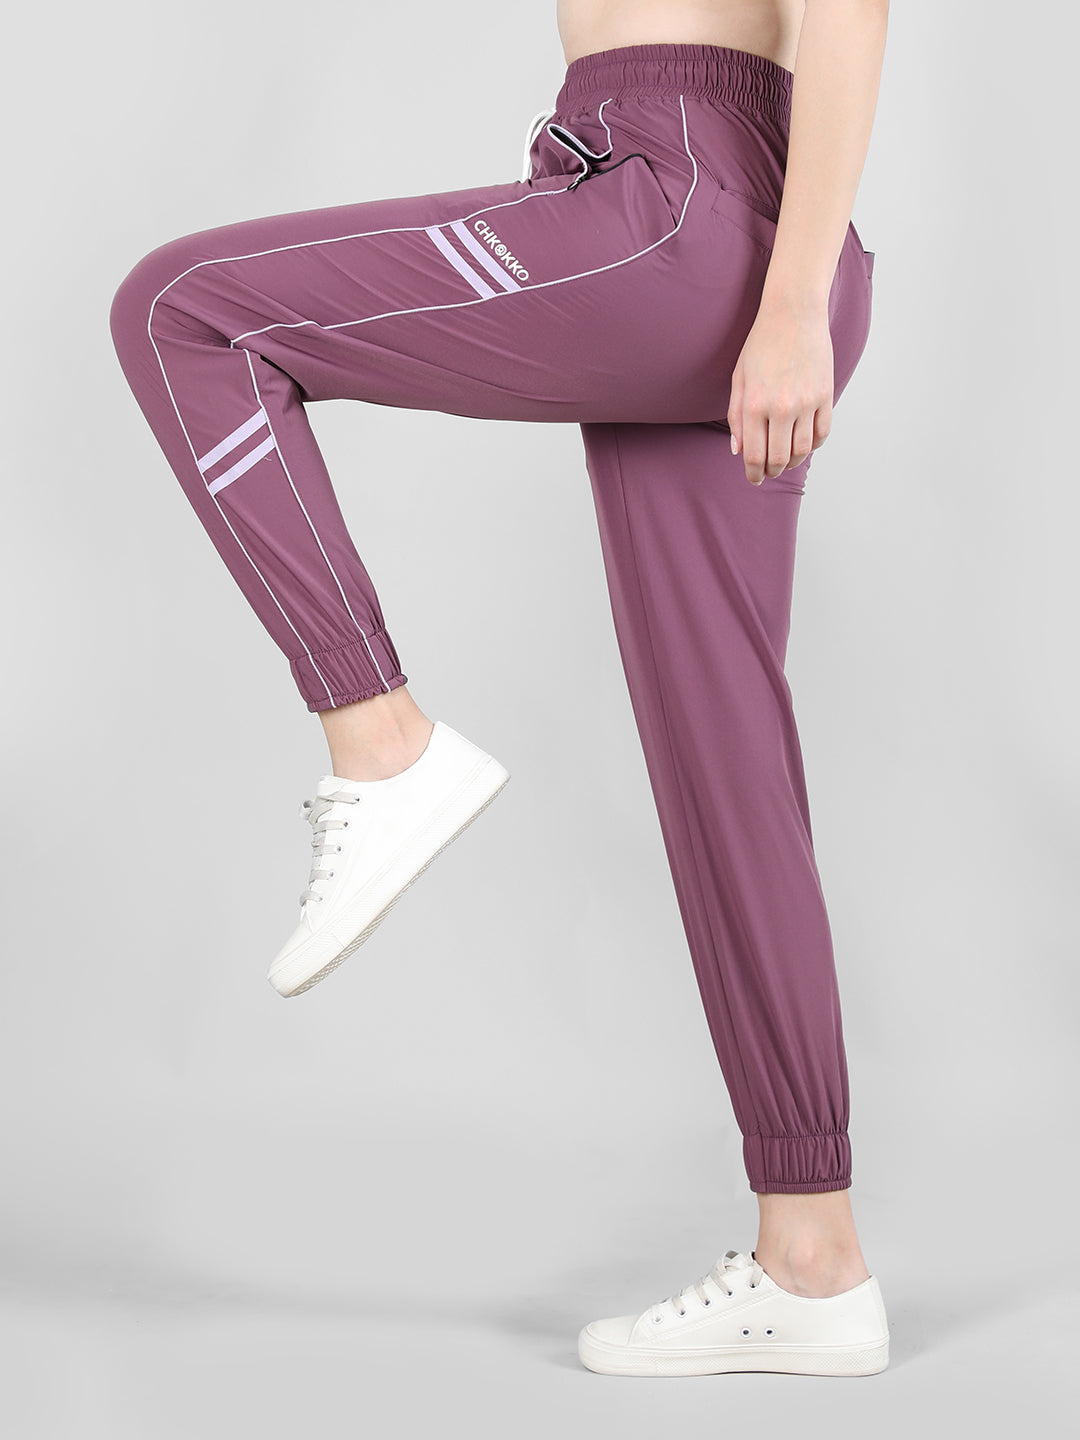 Buy Women Trousers Online | Trouser Pants for Ladies – Styched Fashion